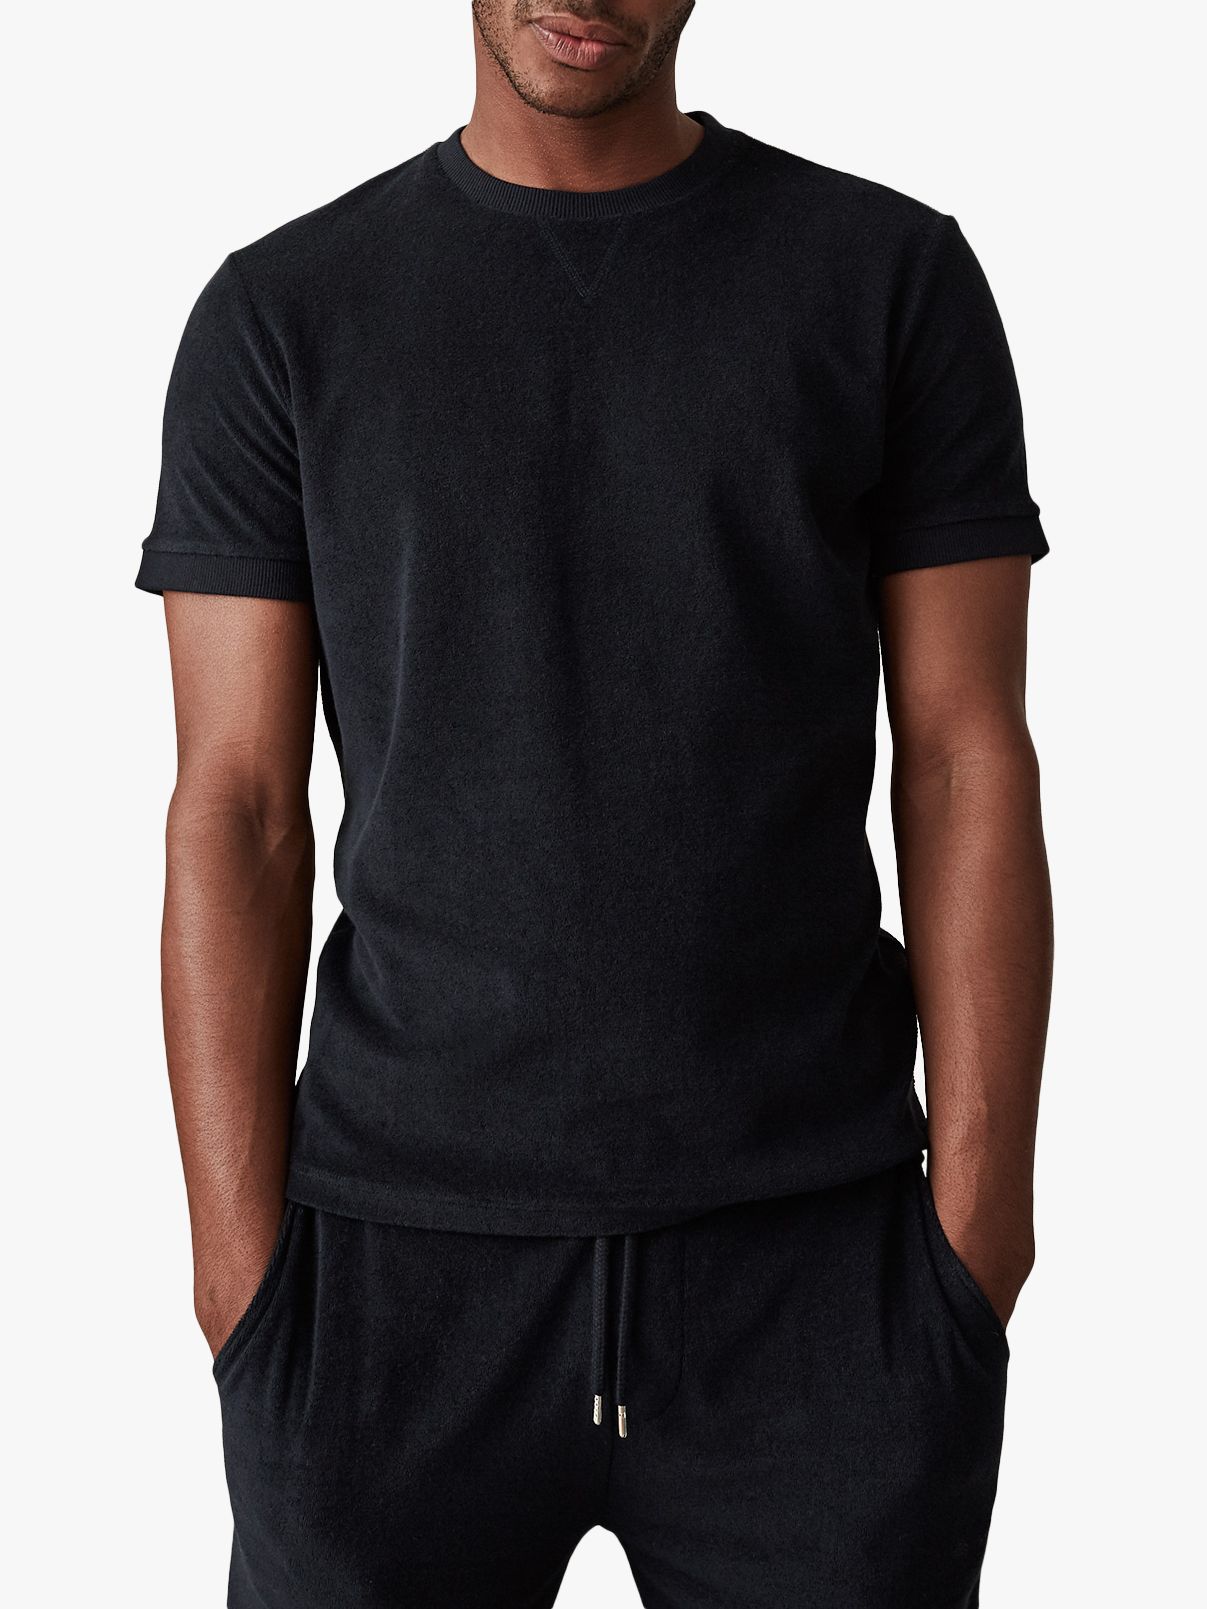 Reiss Terry Towelling Crew Neck T-Shirt, Navy